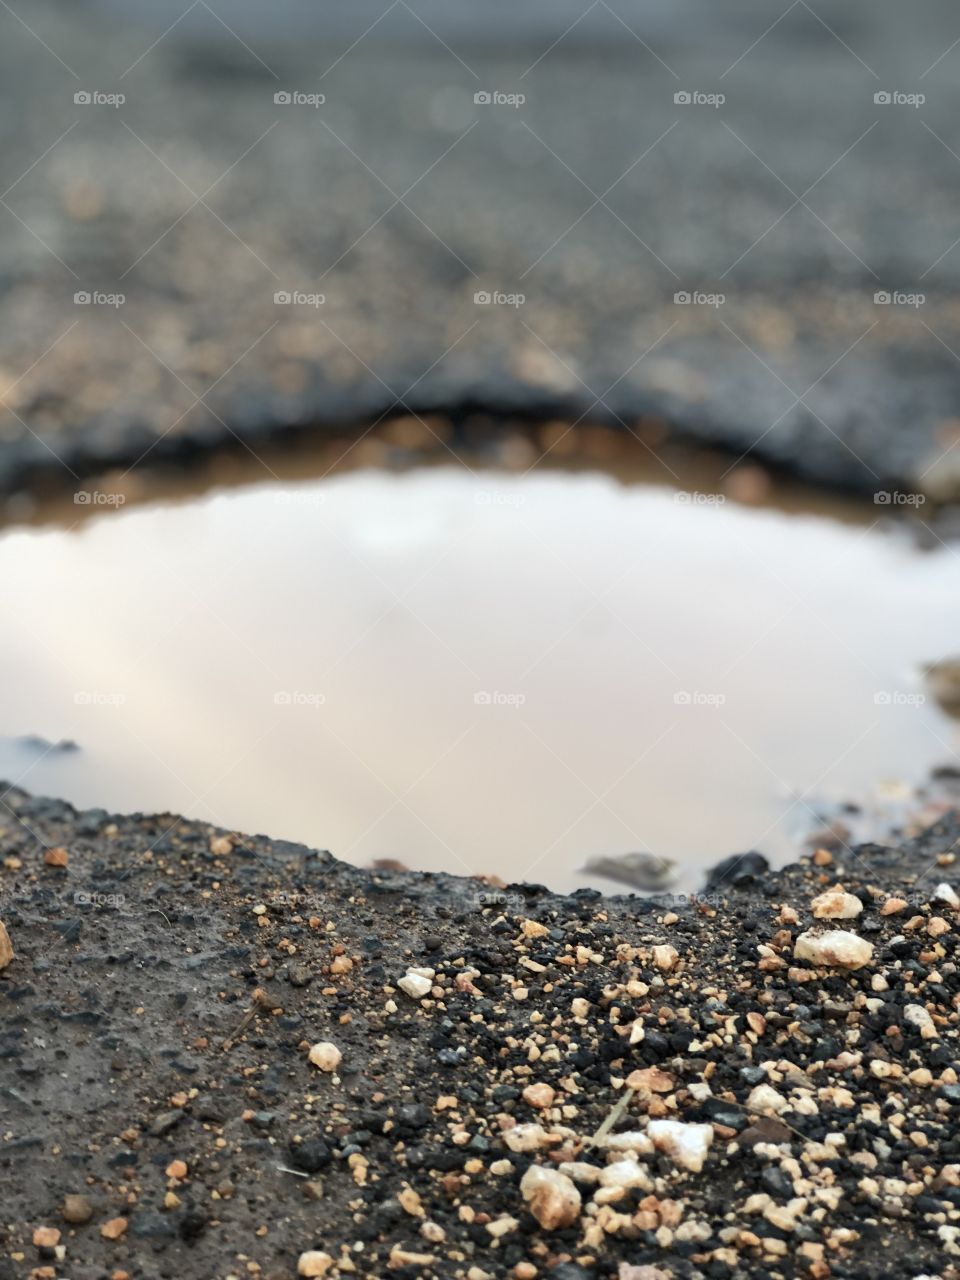 A hole in the pavement. 